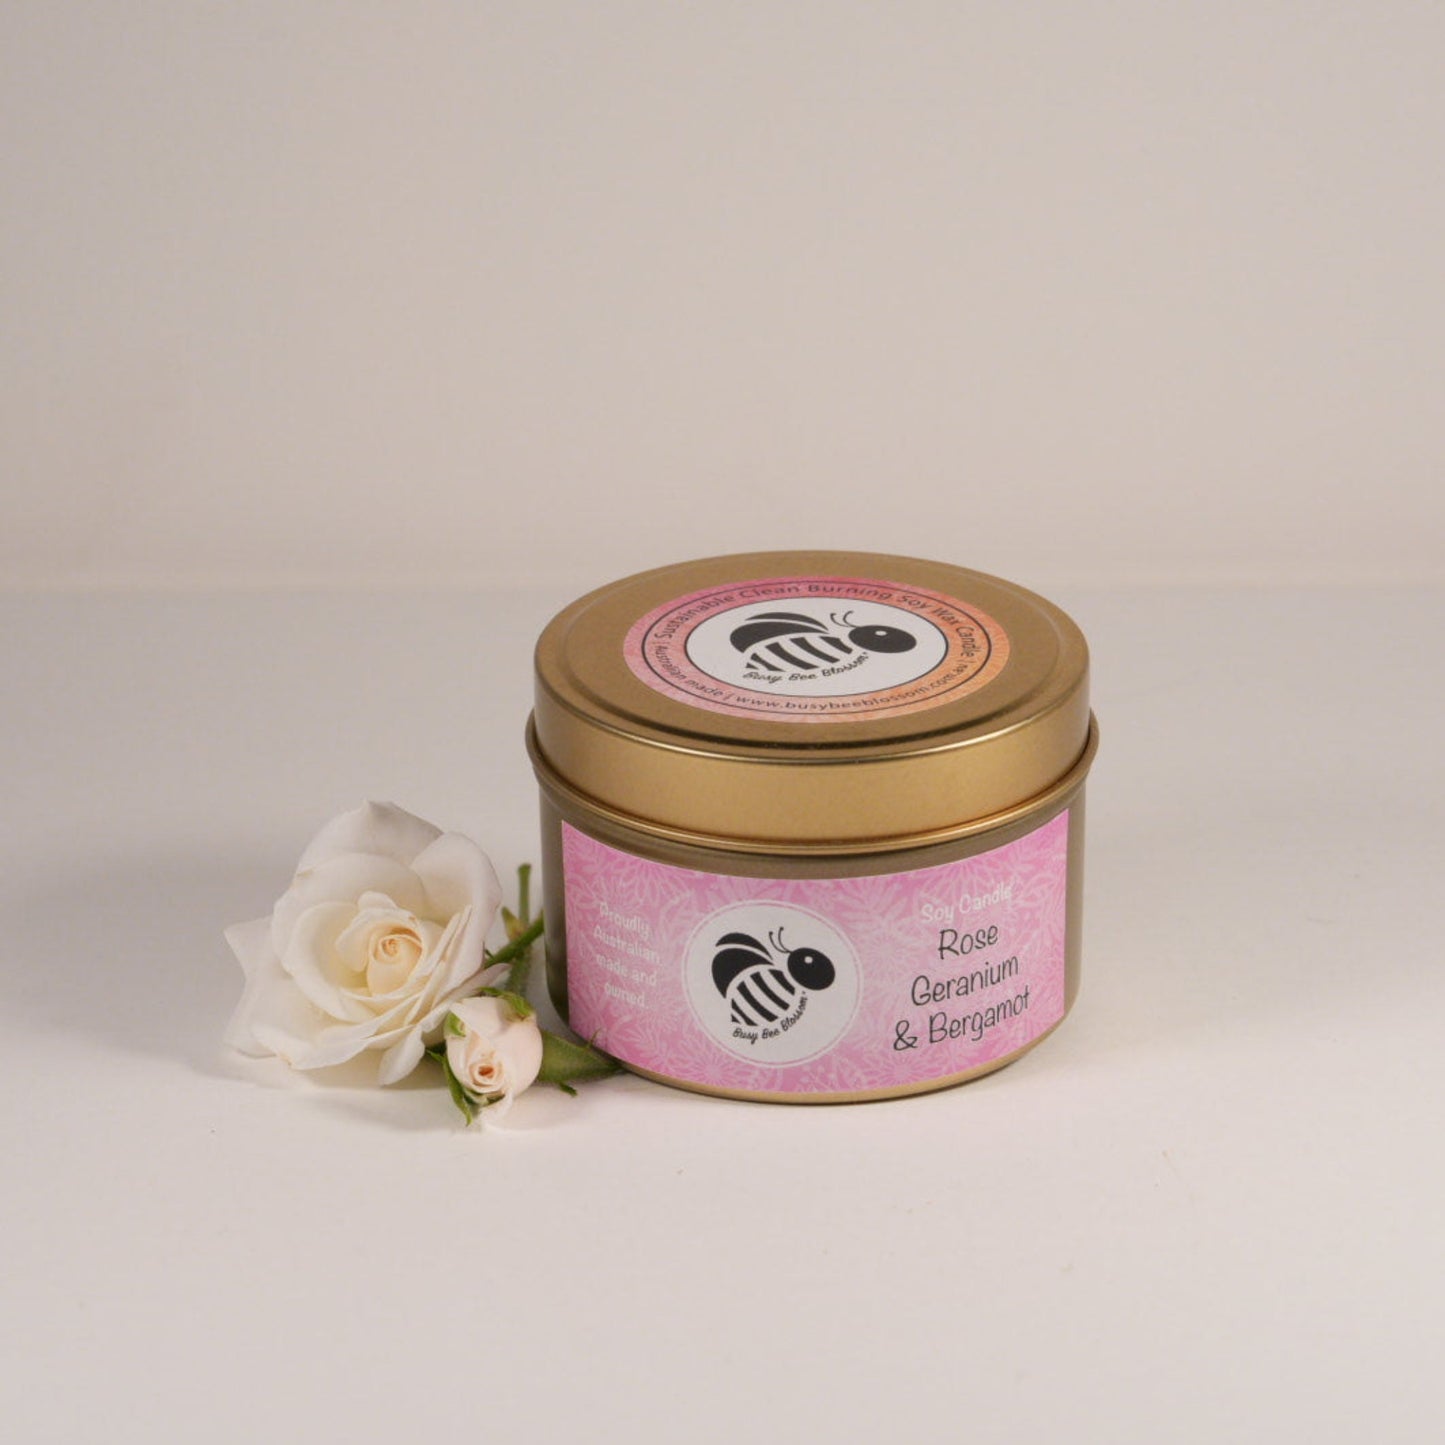 Rose Geranium and Bergamot Gold Travel Tin Soy Candle with roses